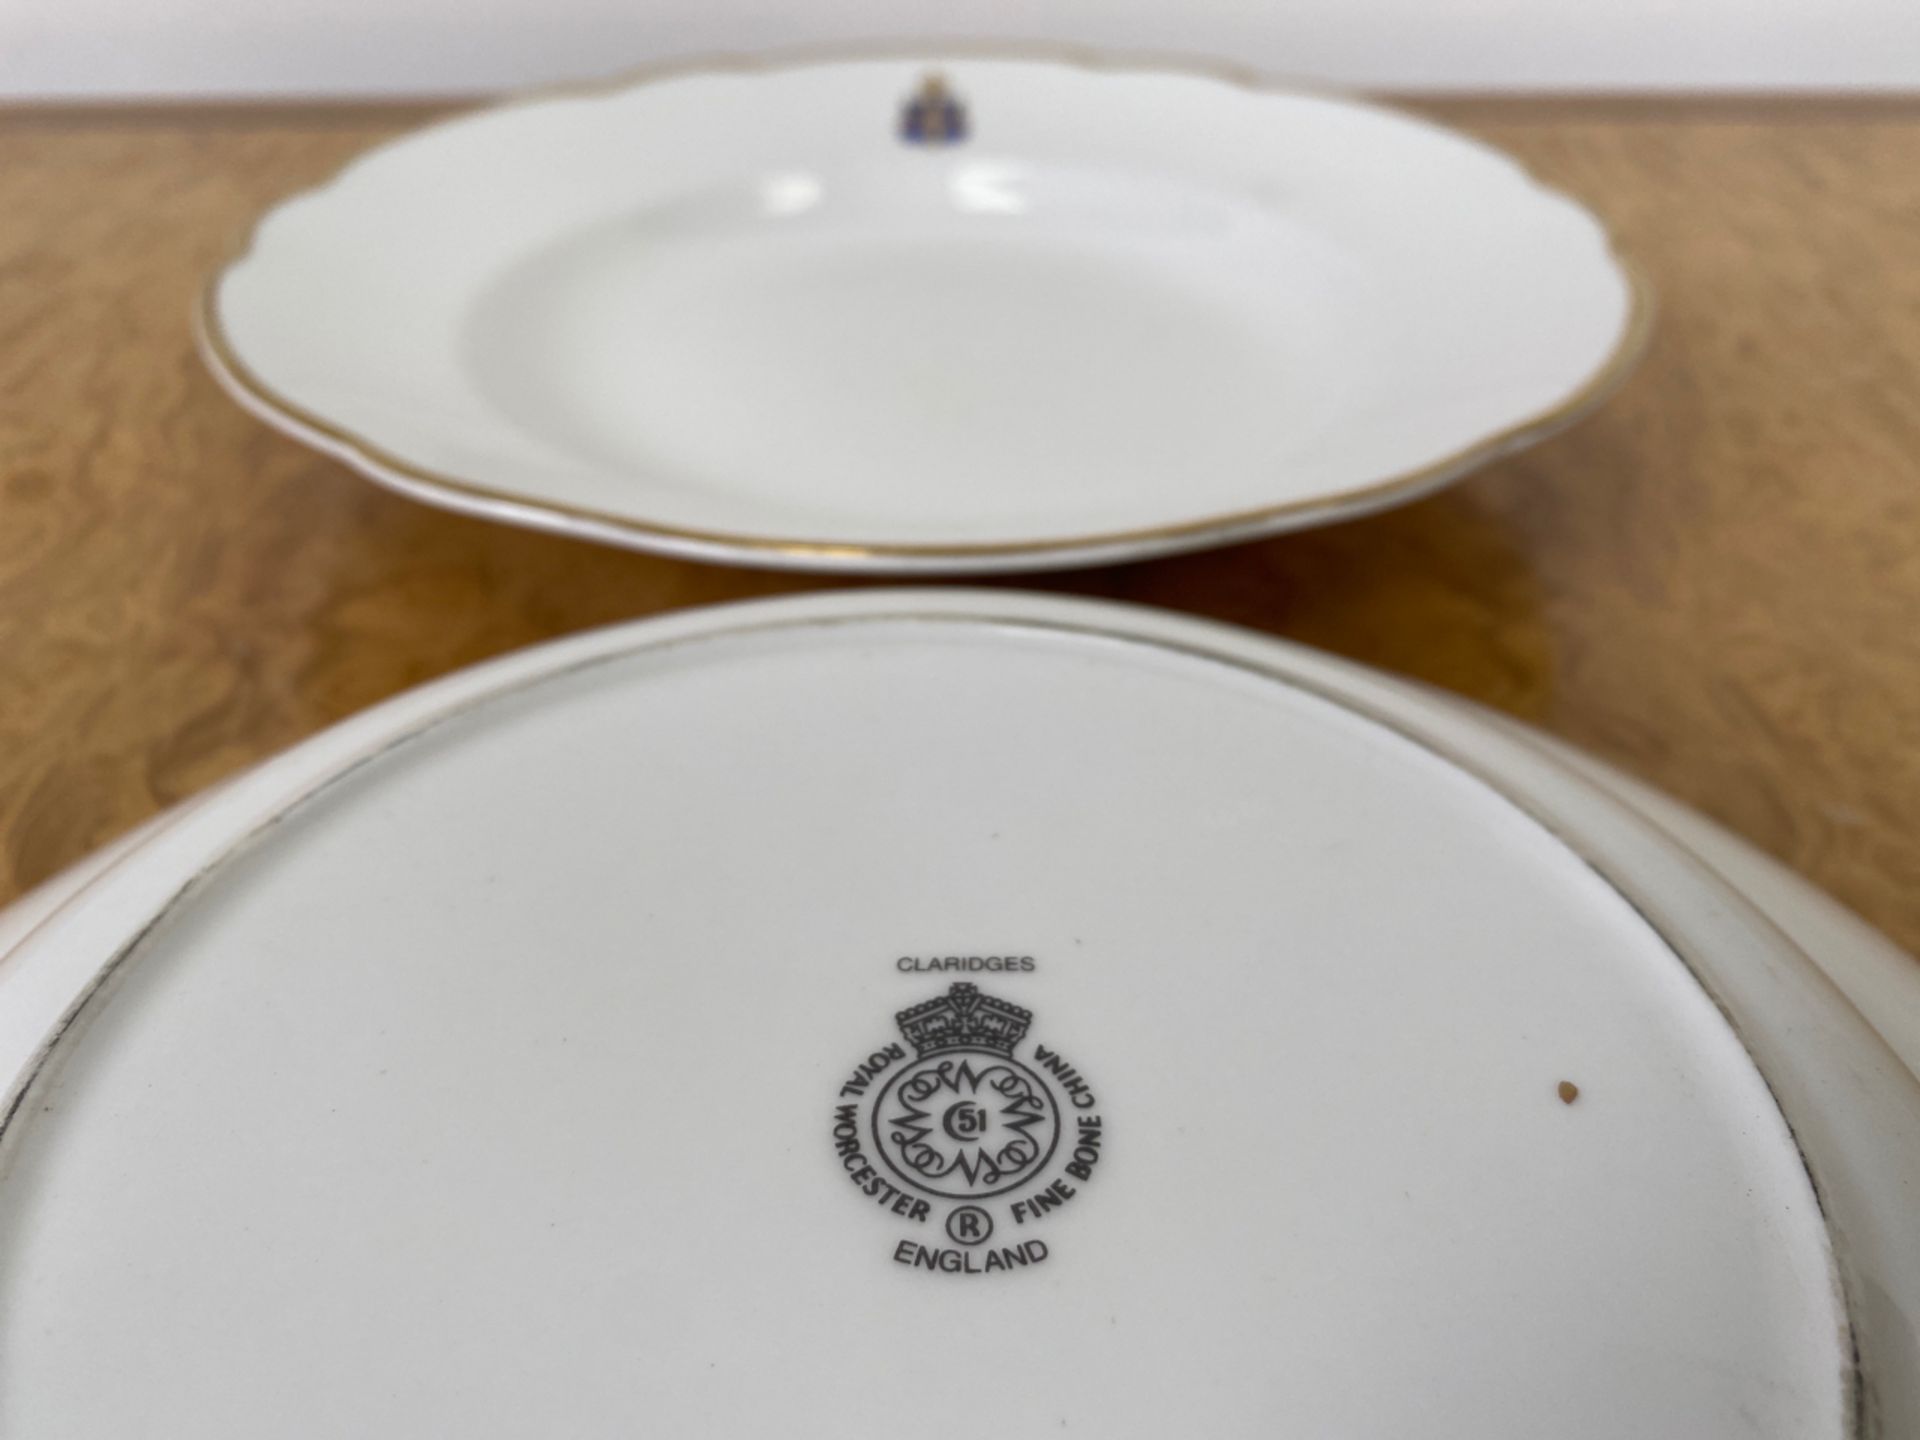 Set of Crested Crockery for Claridge's by Chommette 1884 - Image 28 of 31